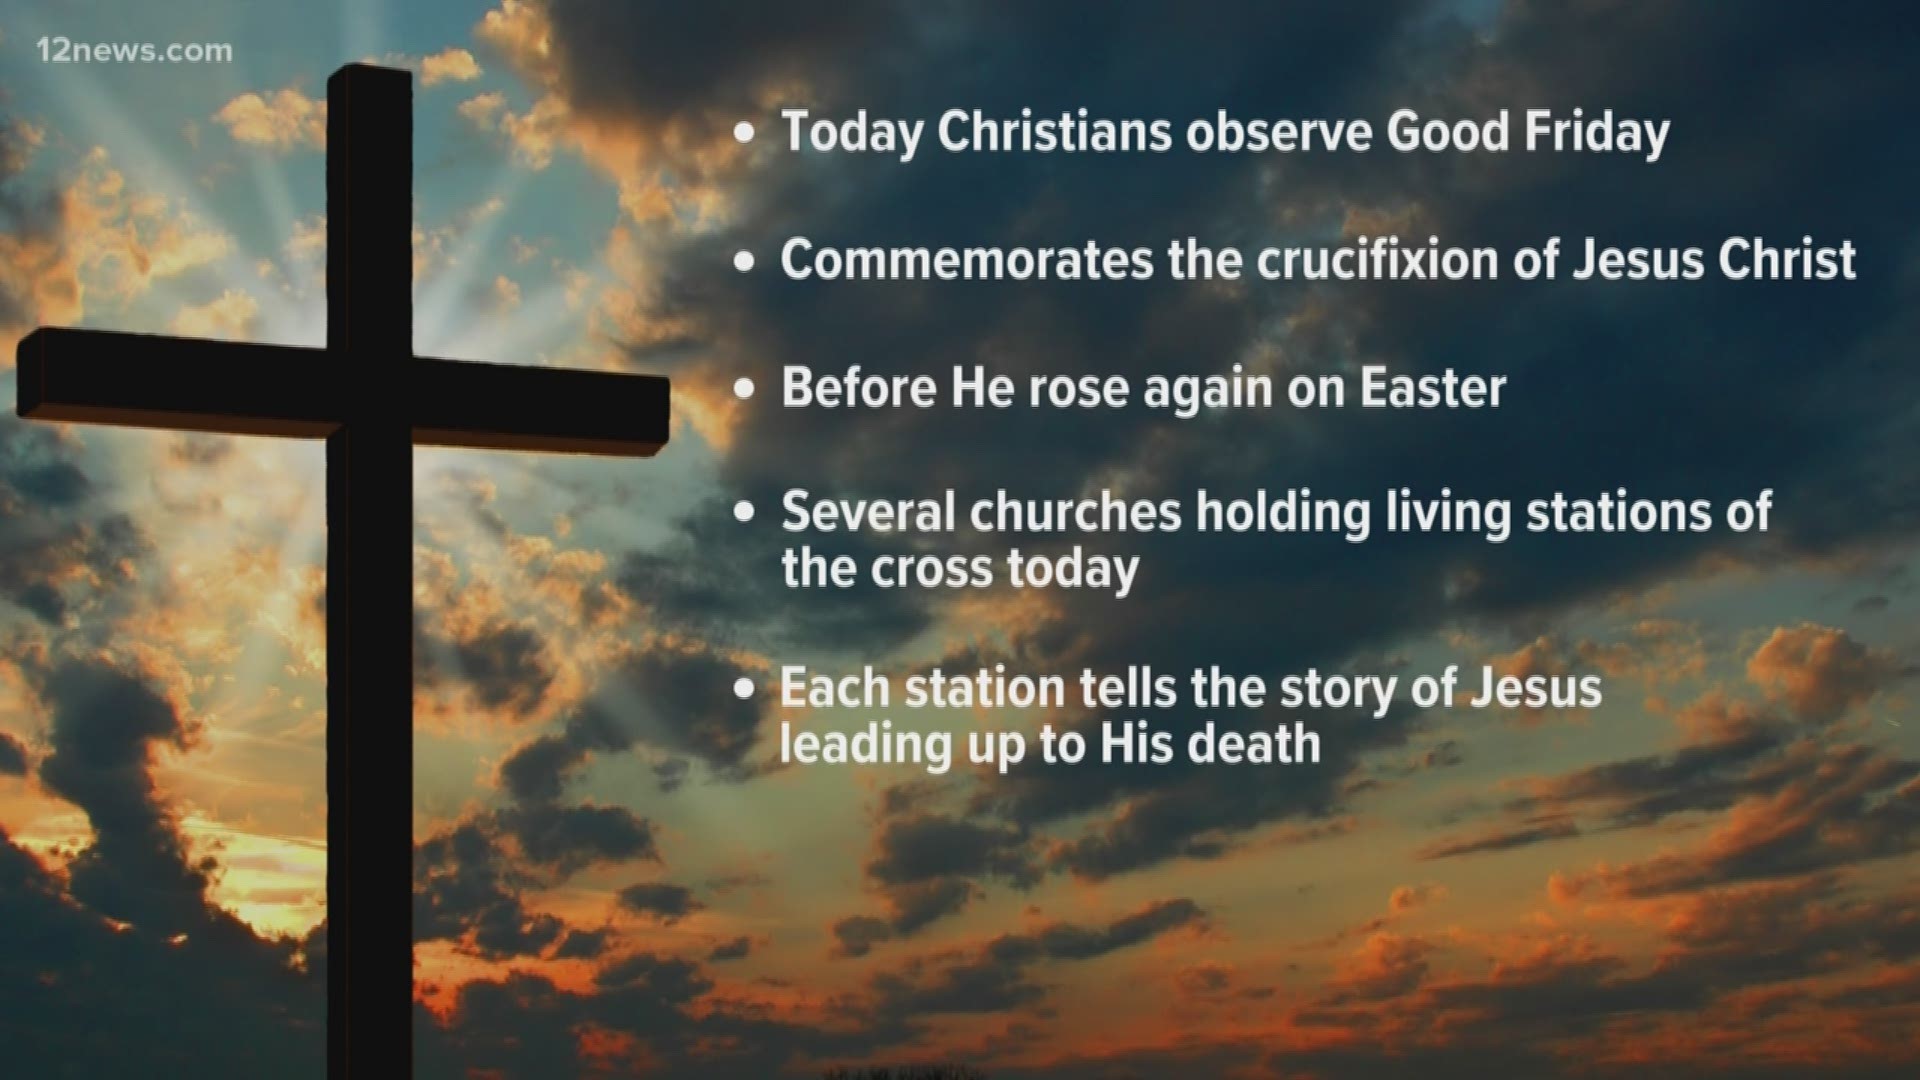 Christians are observing Good Friday, marking the crucifixion of Jesus Christ. Those of the Jewish faith are commemorating Passover, when the Israelites left Egypt.